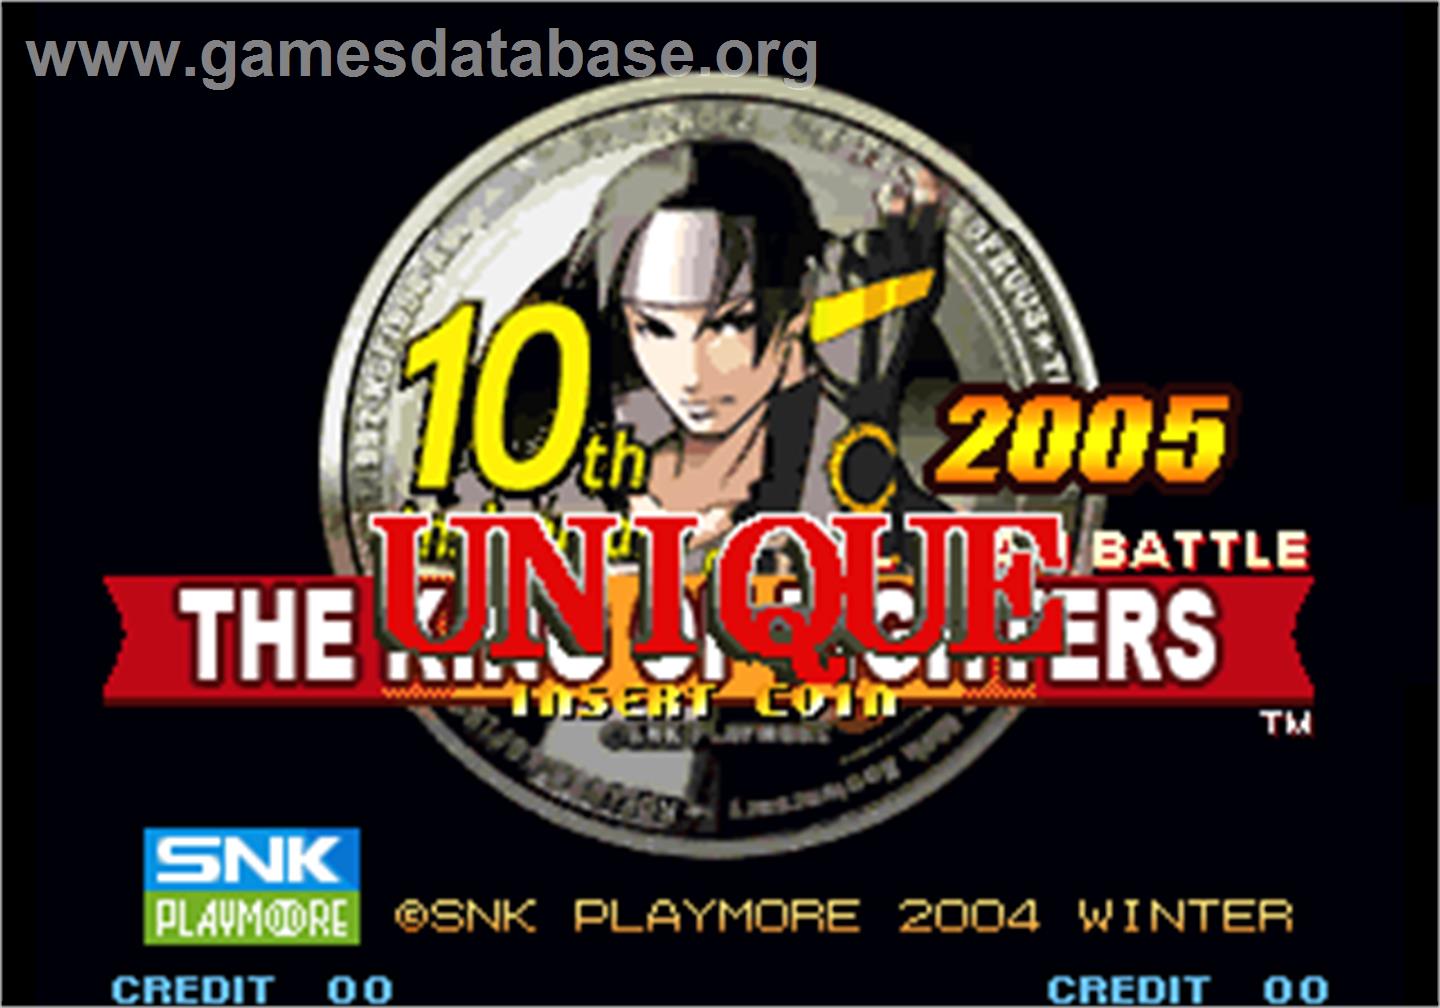 The King of Fighters 10th Anniversary 2005 Unique - Arcade - Artwork - Title Screen